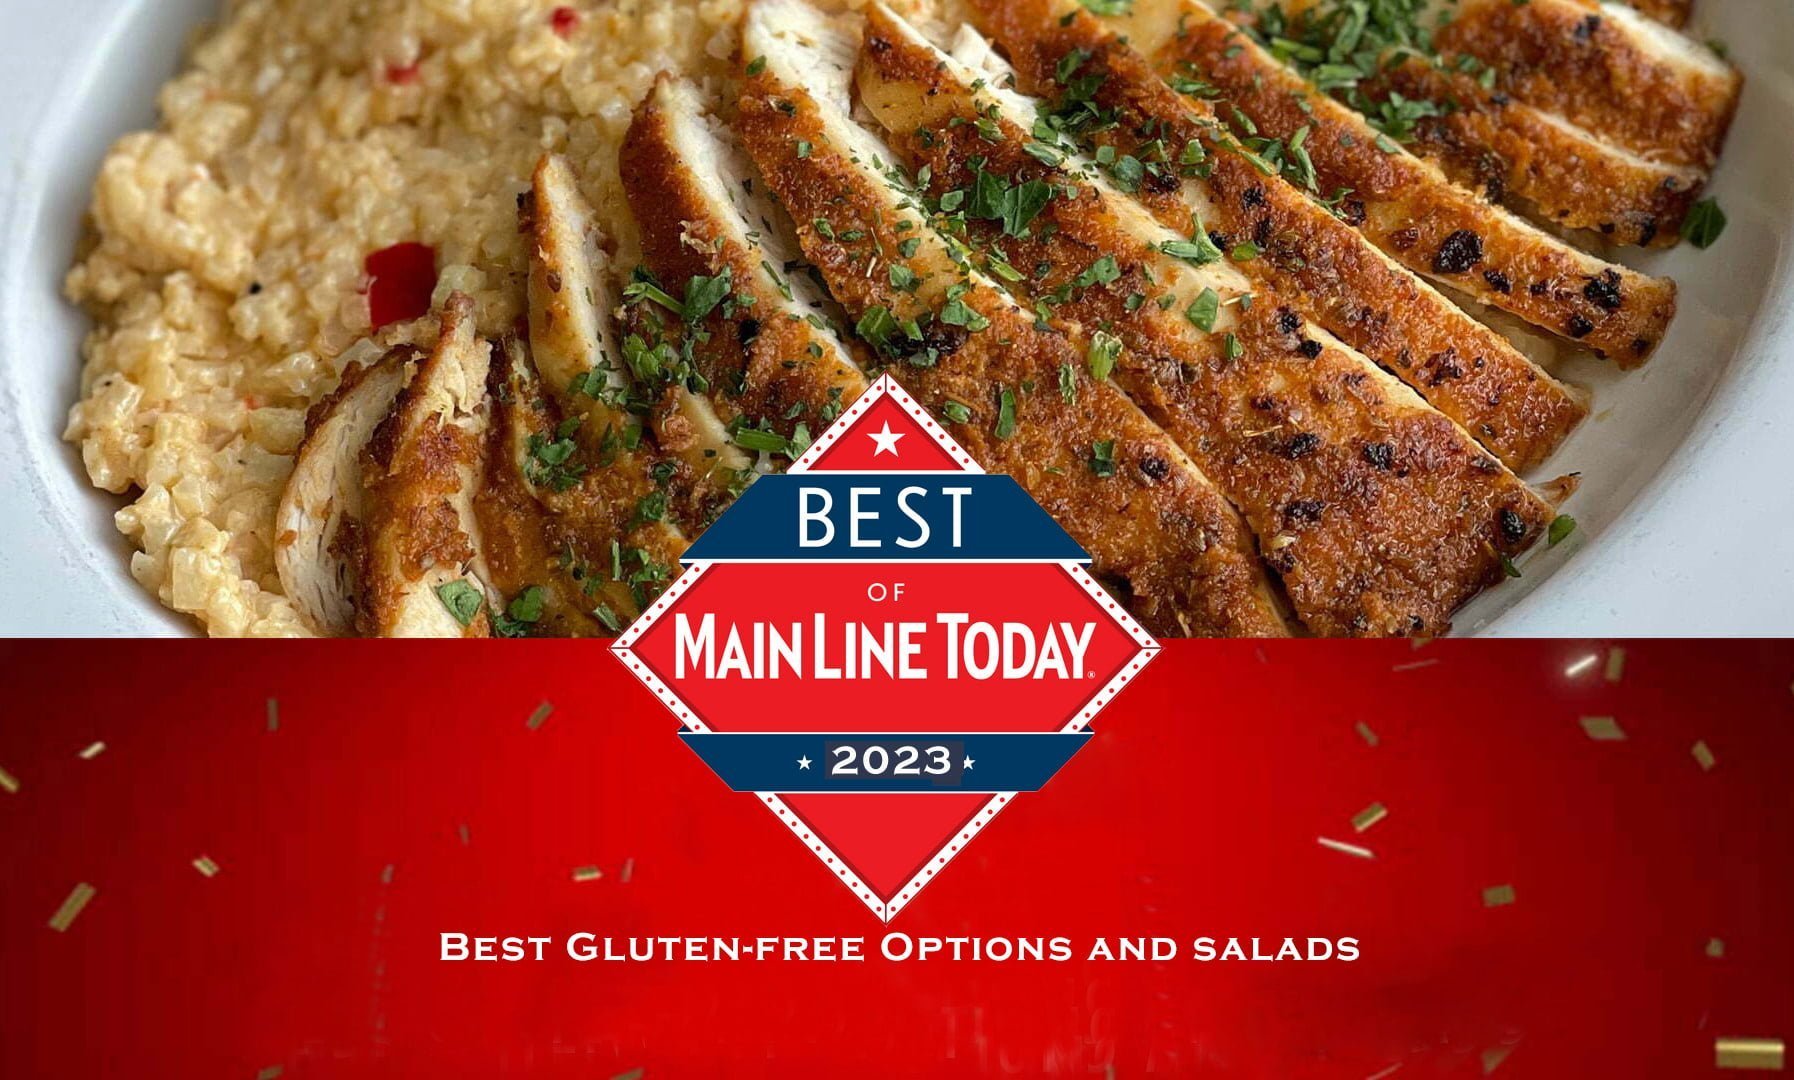 Best of Main Line Today 2023 | Best Gluten-Fre Options and Salads